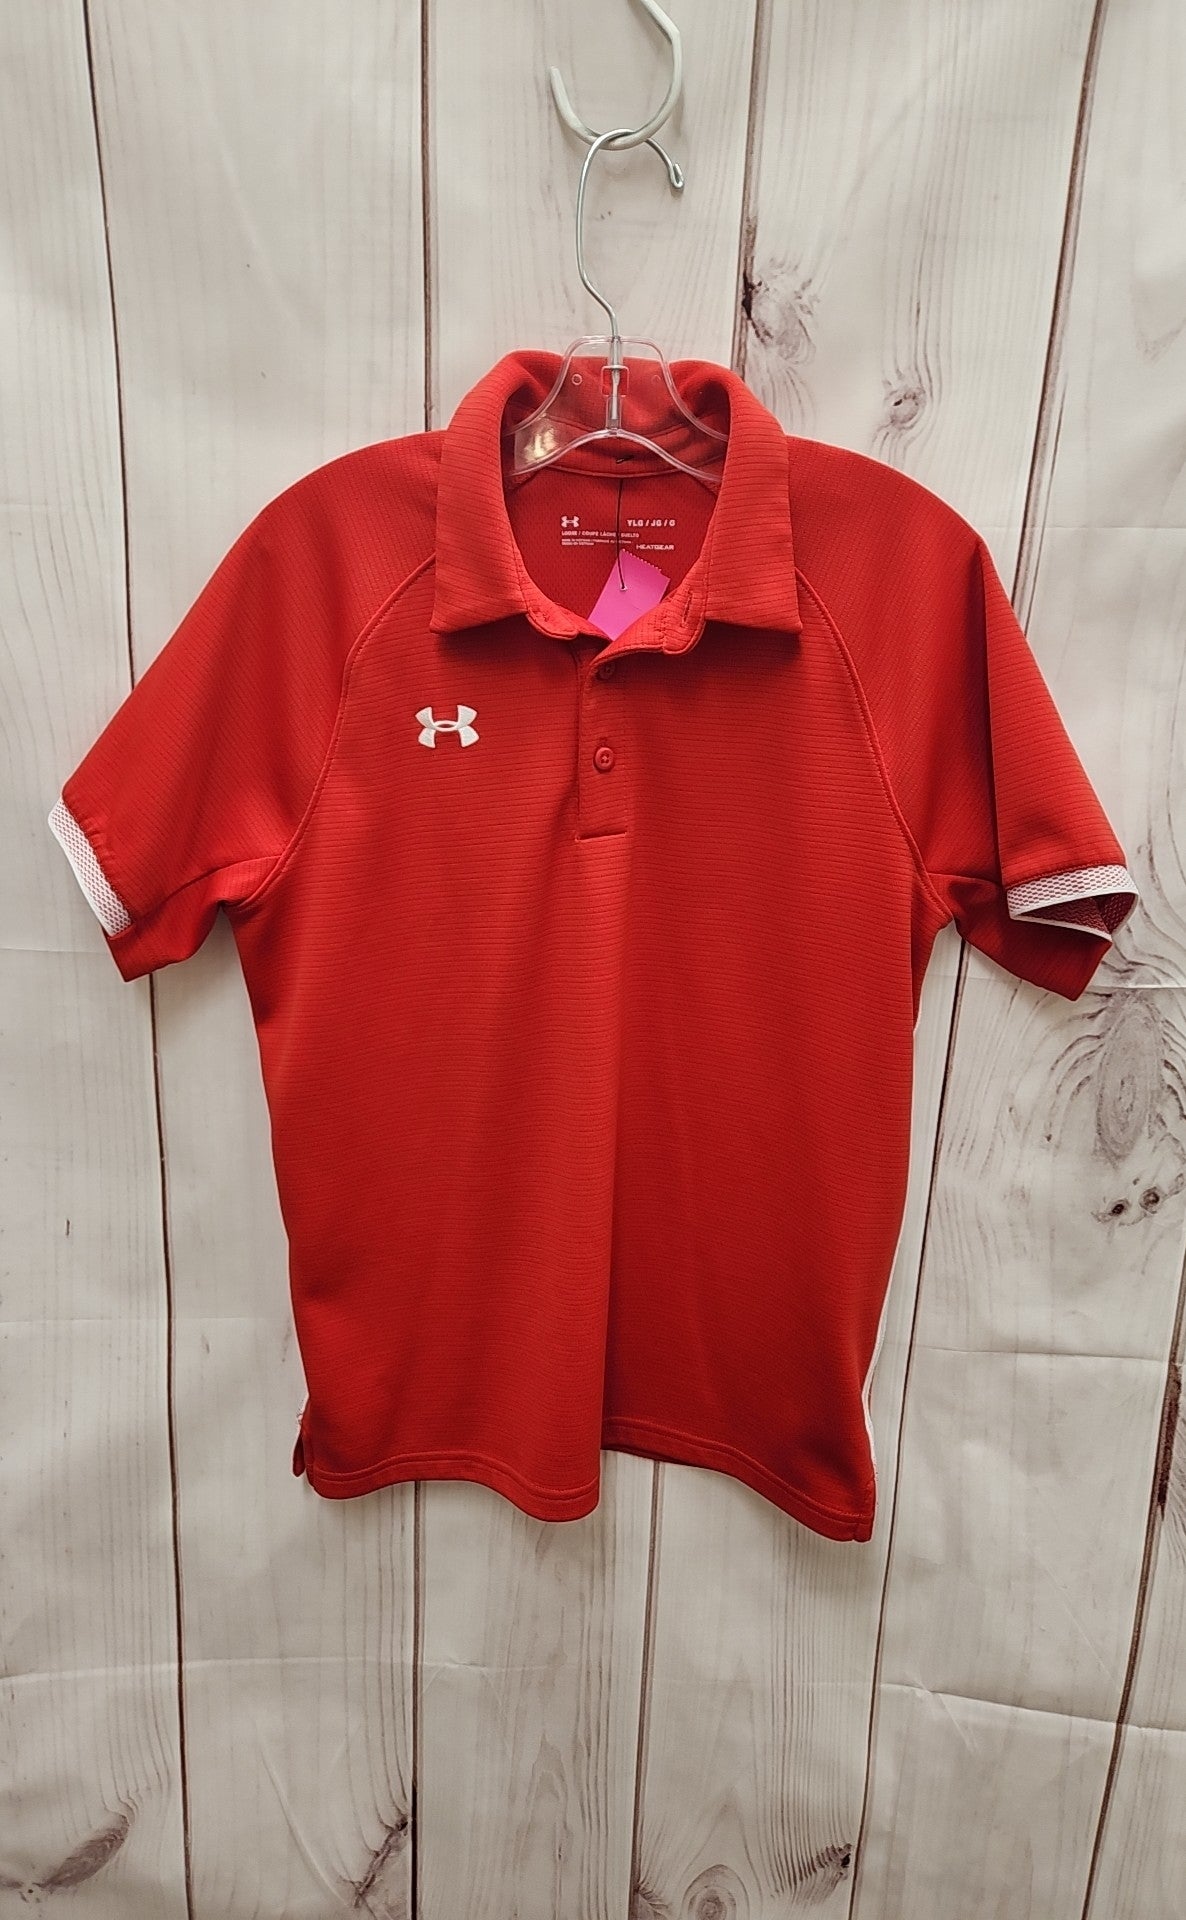 Under Armour Boy's Size 14 Red Shirt